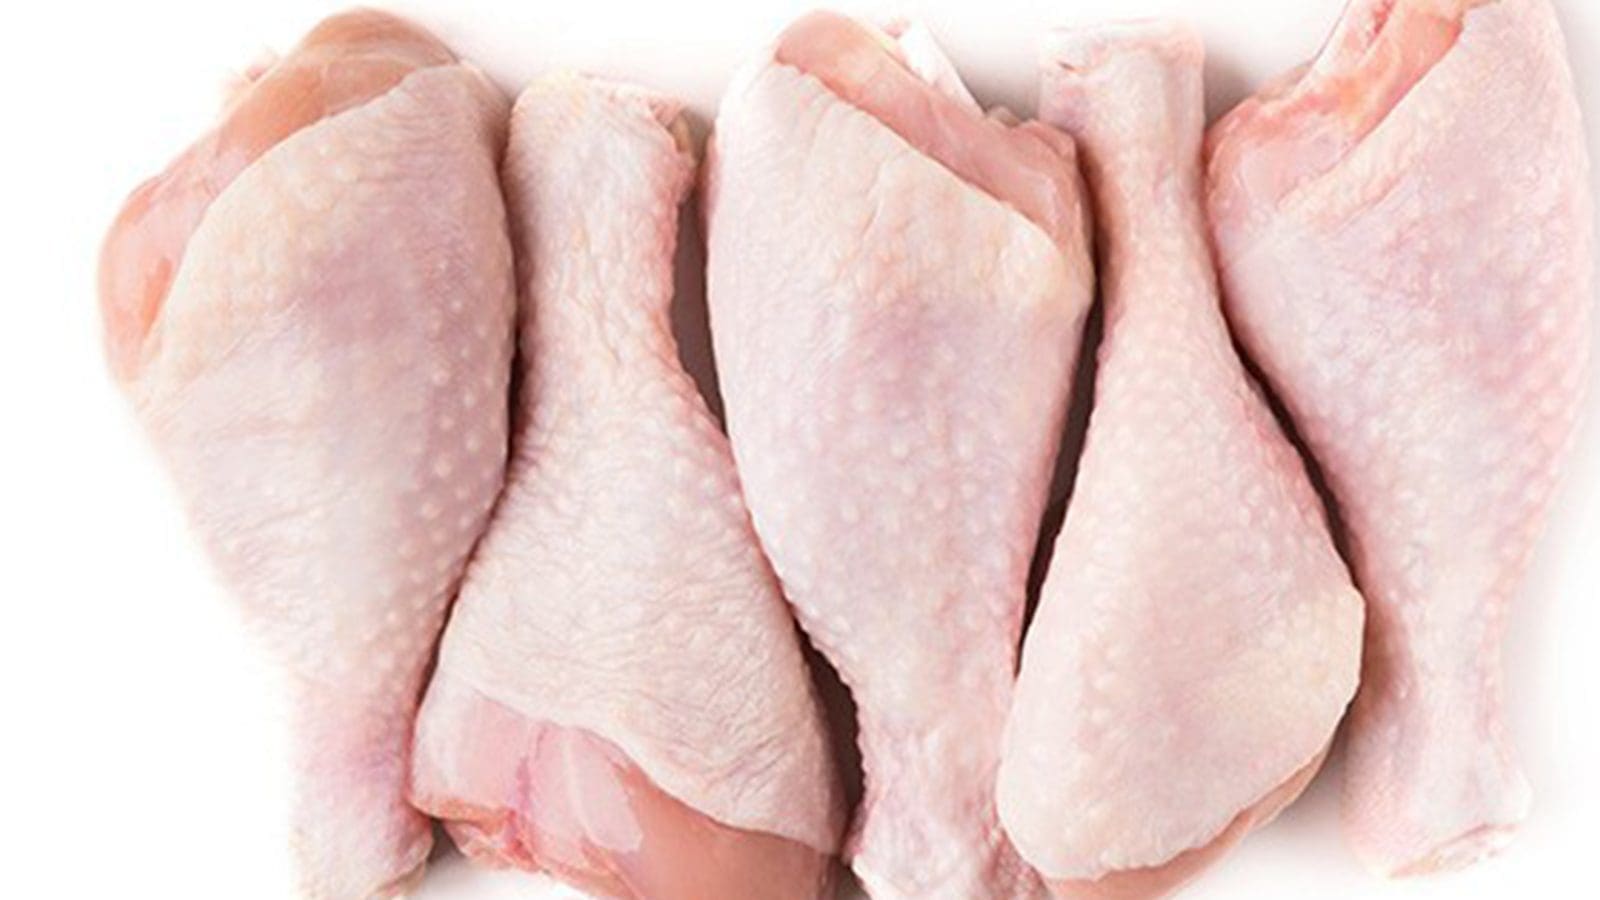 Multi-hurdle approach proves vital in Salmonella control across poultry production chain